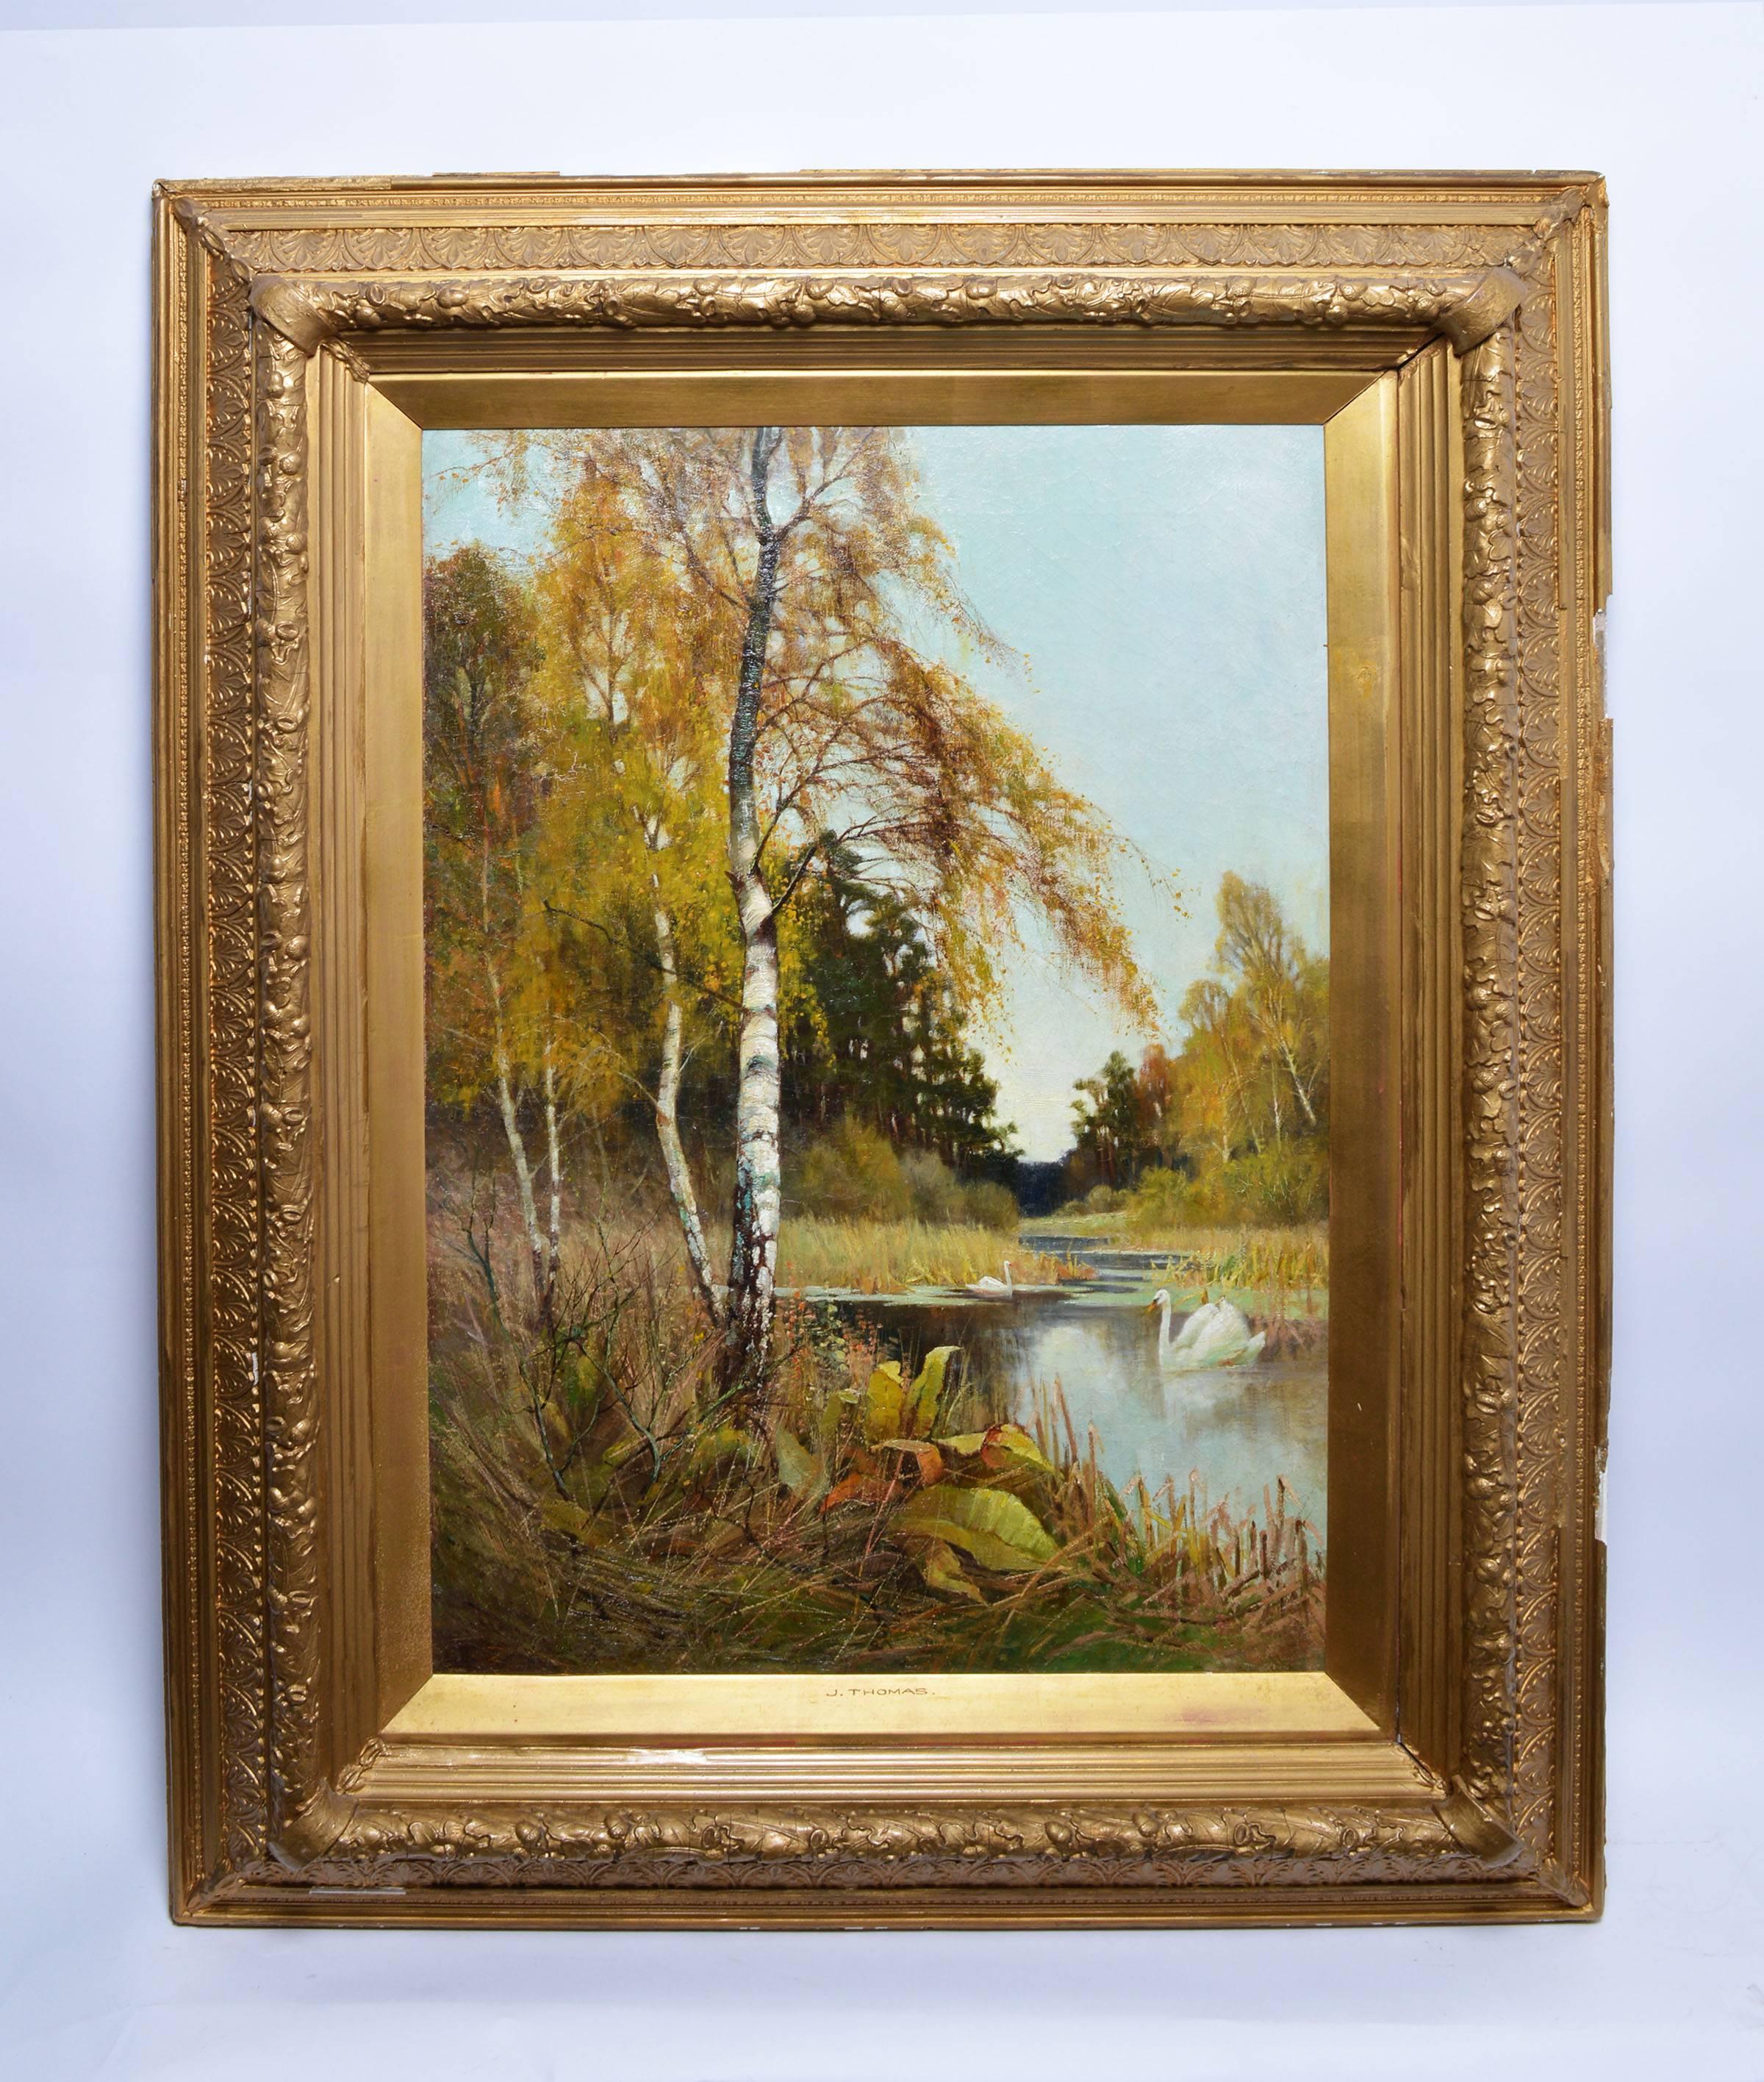 Antique River Landscape  with Swans and Birch Tree - Painting by Unknown